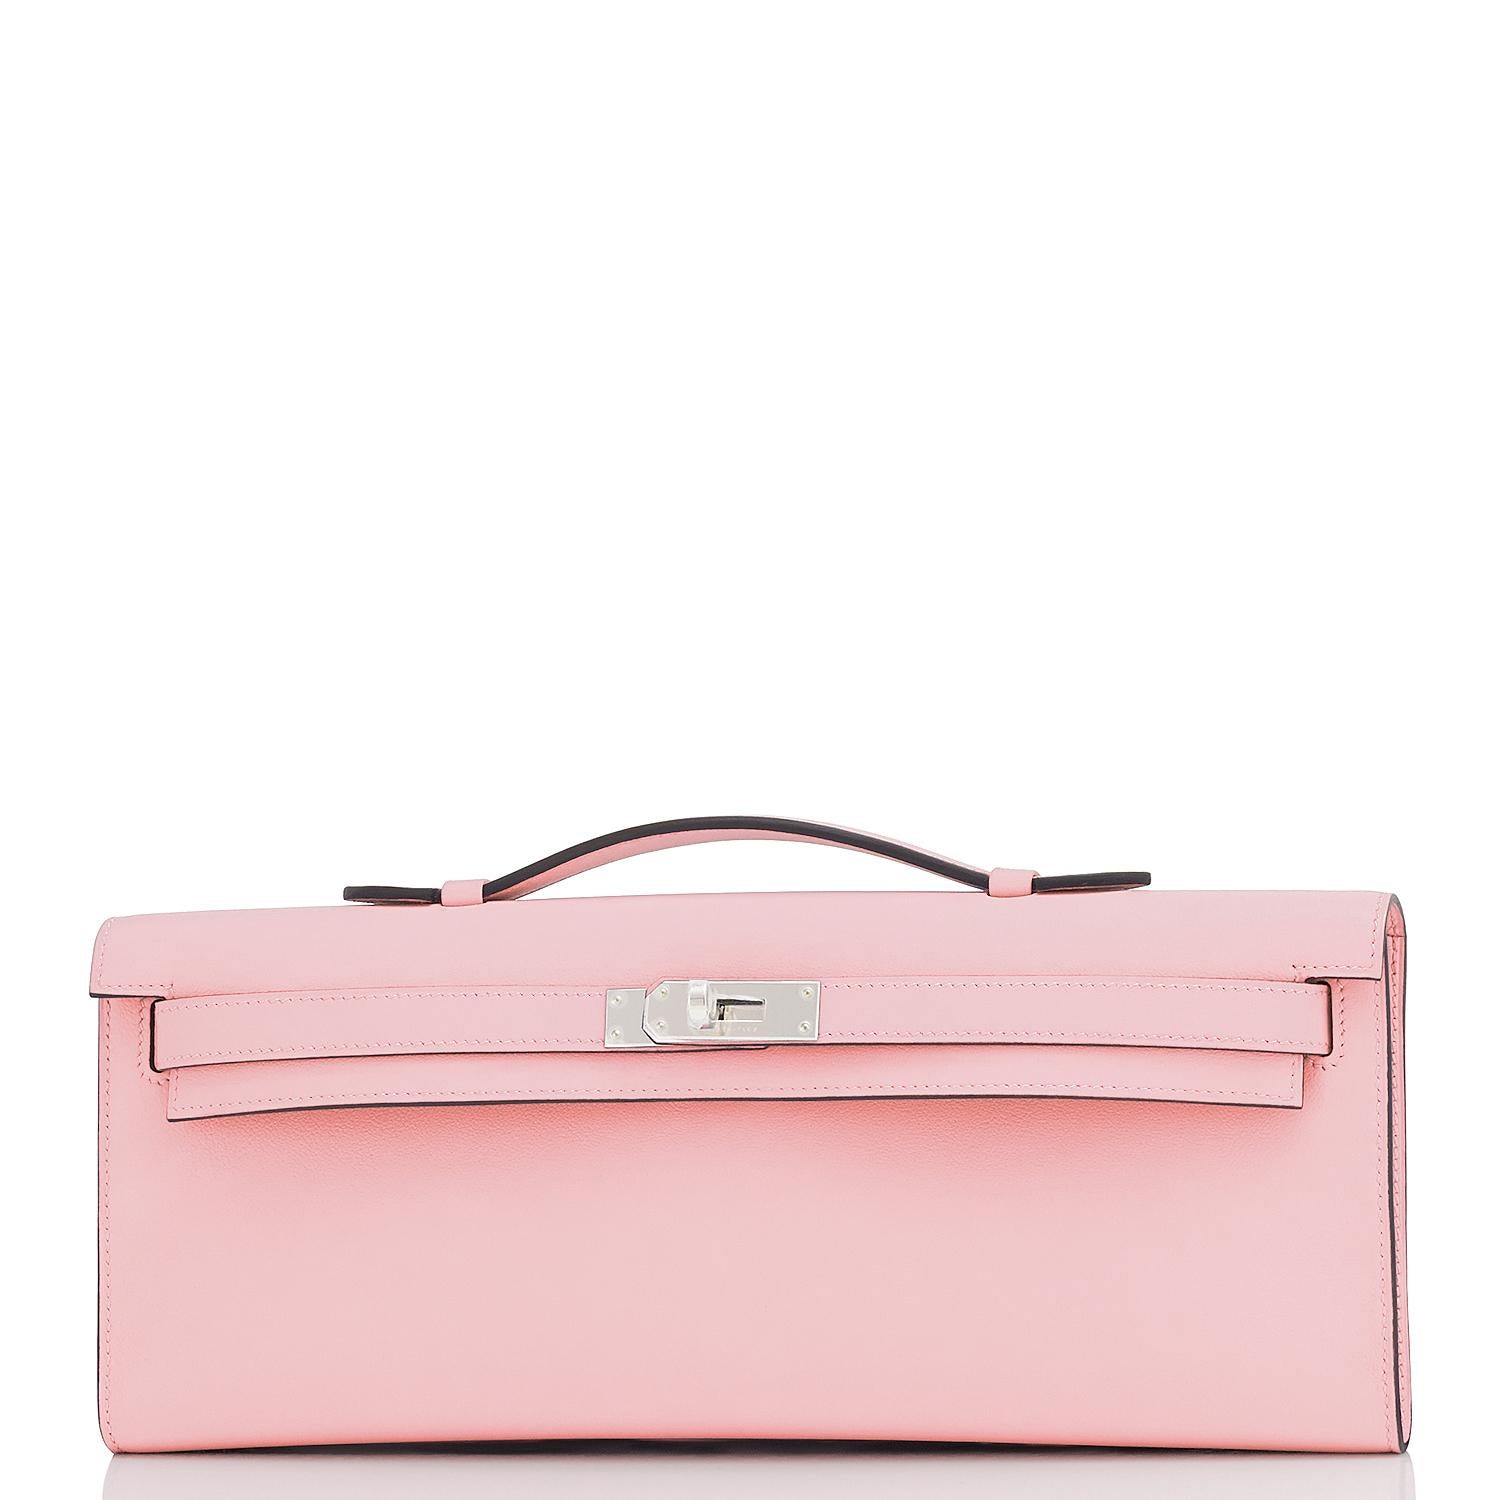 Hermes Kelly Cut Rose Sakura Pale Pink Clutch Swift New RARE
Ultra rare cult favorite Rose Sakura in NEW condition!
Brand New in Box. Store fresh. Pristine condition (with plastic on hardware).
Perfect gift! Comes with Hermes dust bag, replacement